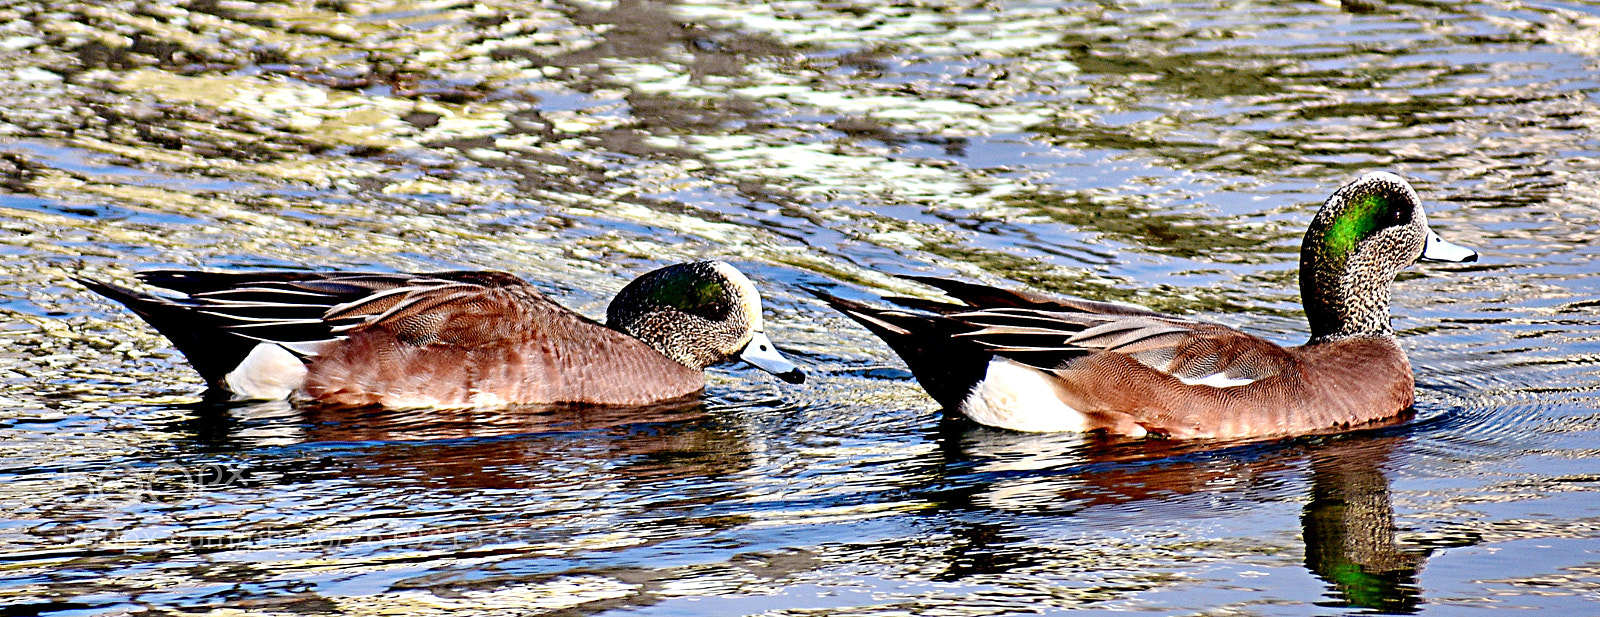 Nikon D7200 sample photo. Two ducks swimming in photography